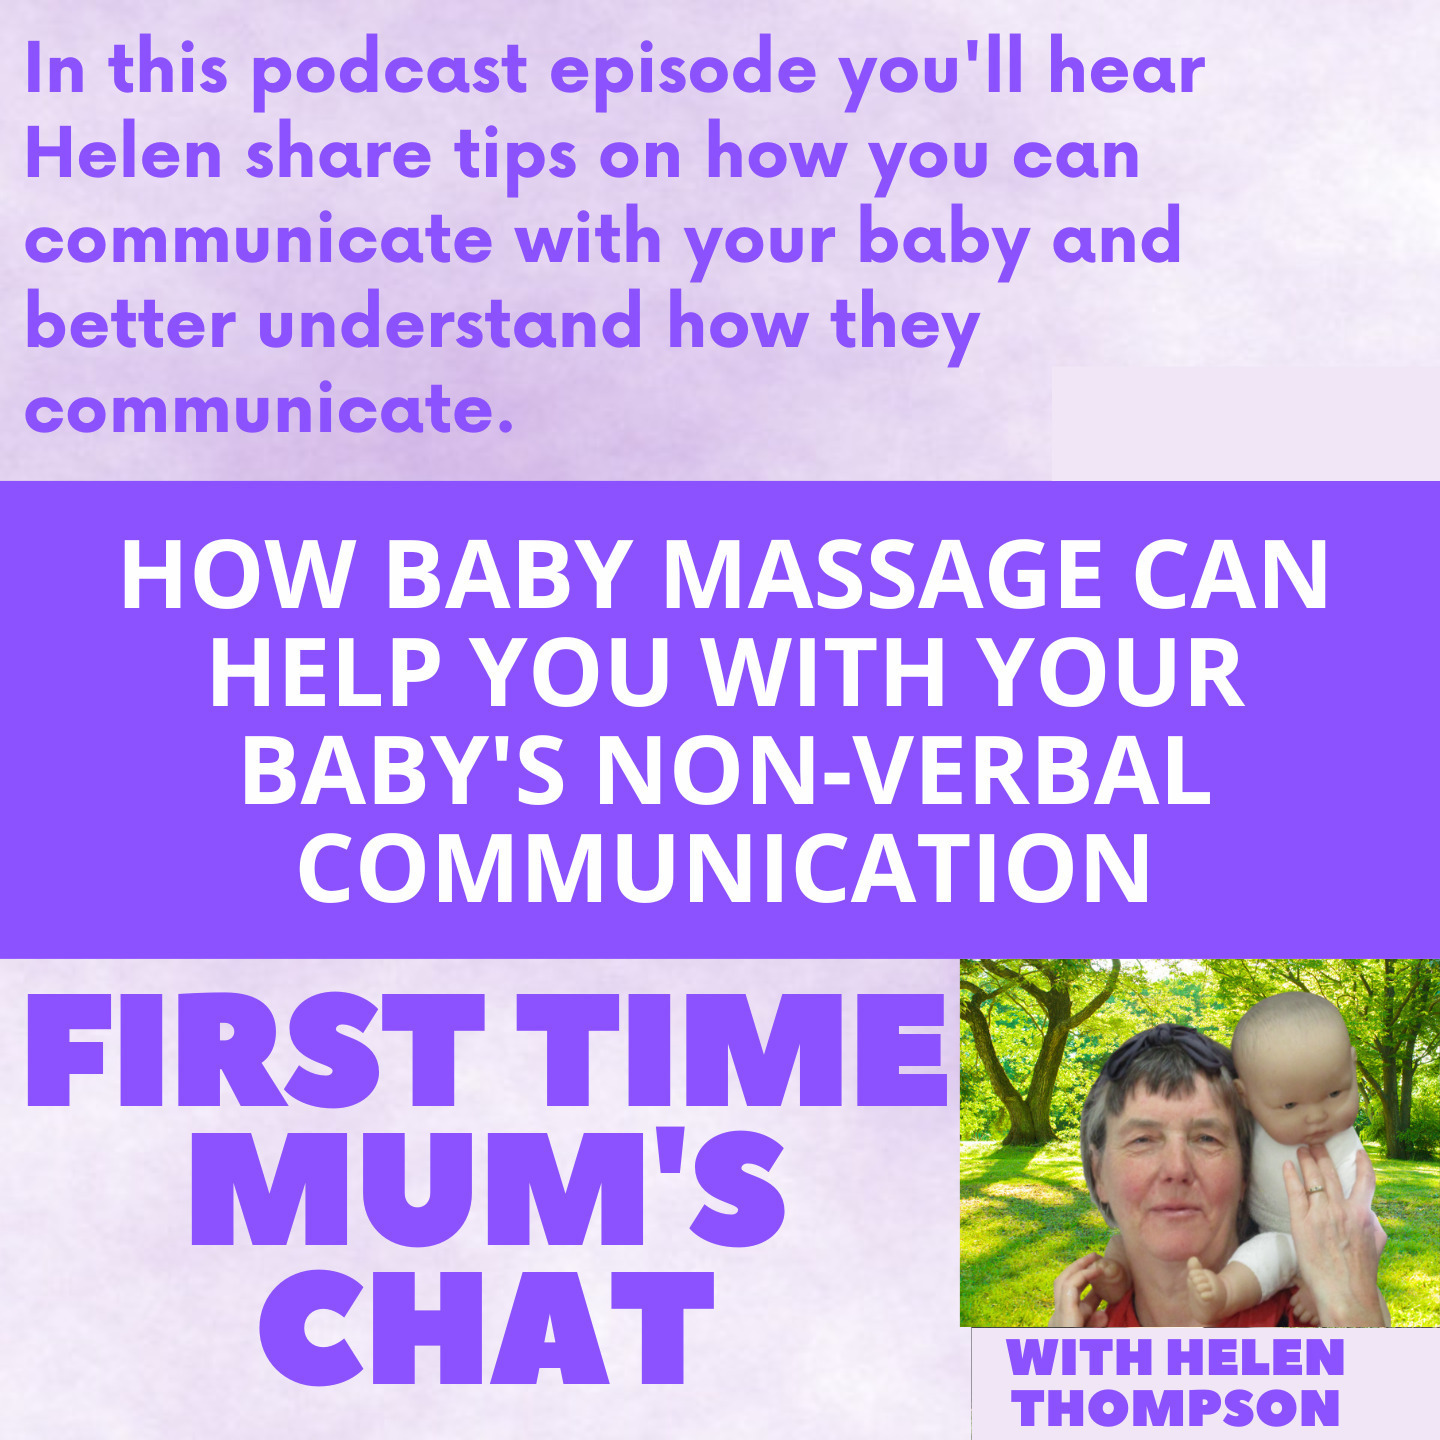 How Can Baby Massage Help You With Your Baby's Non-Verbal Communication